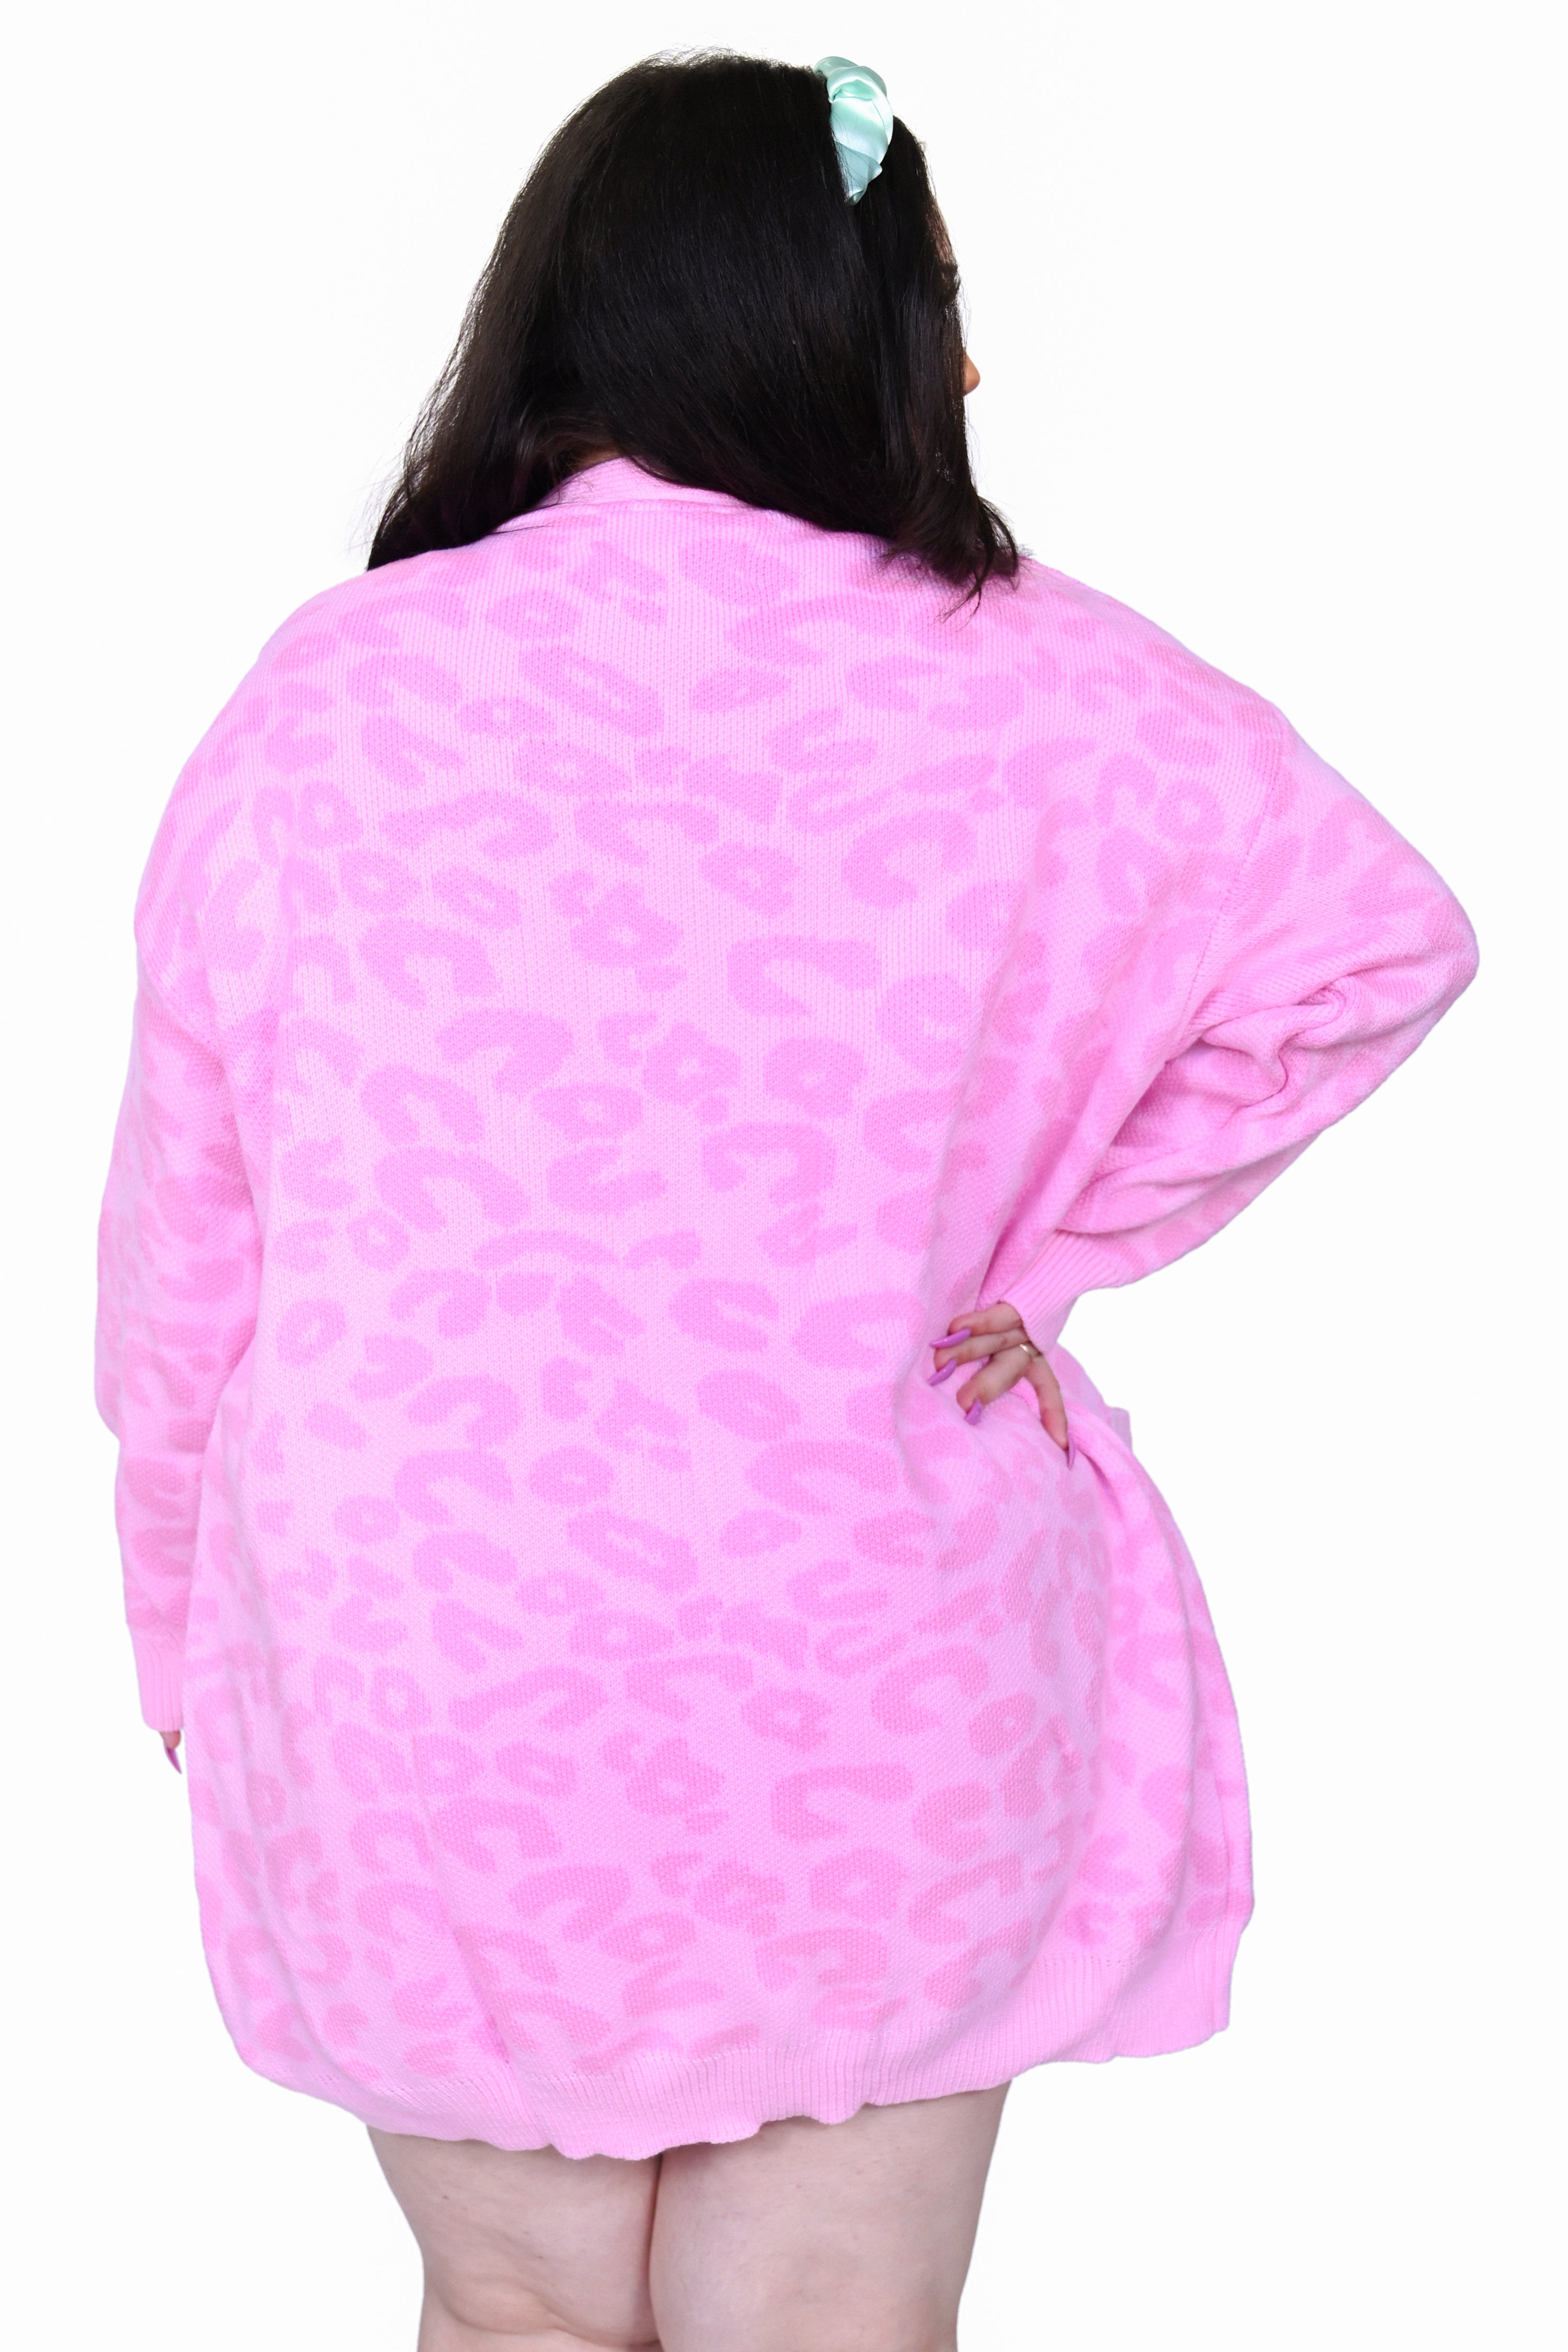 All over pink leopard print cardigan in a snuggly oversized fit.